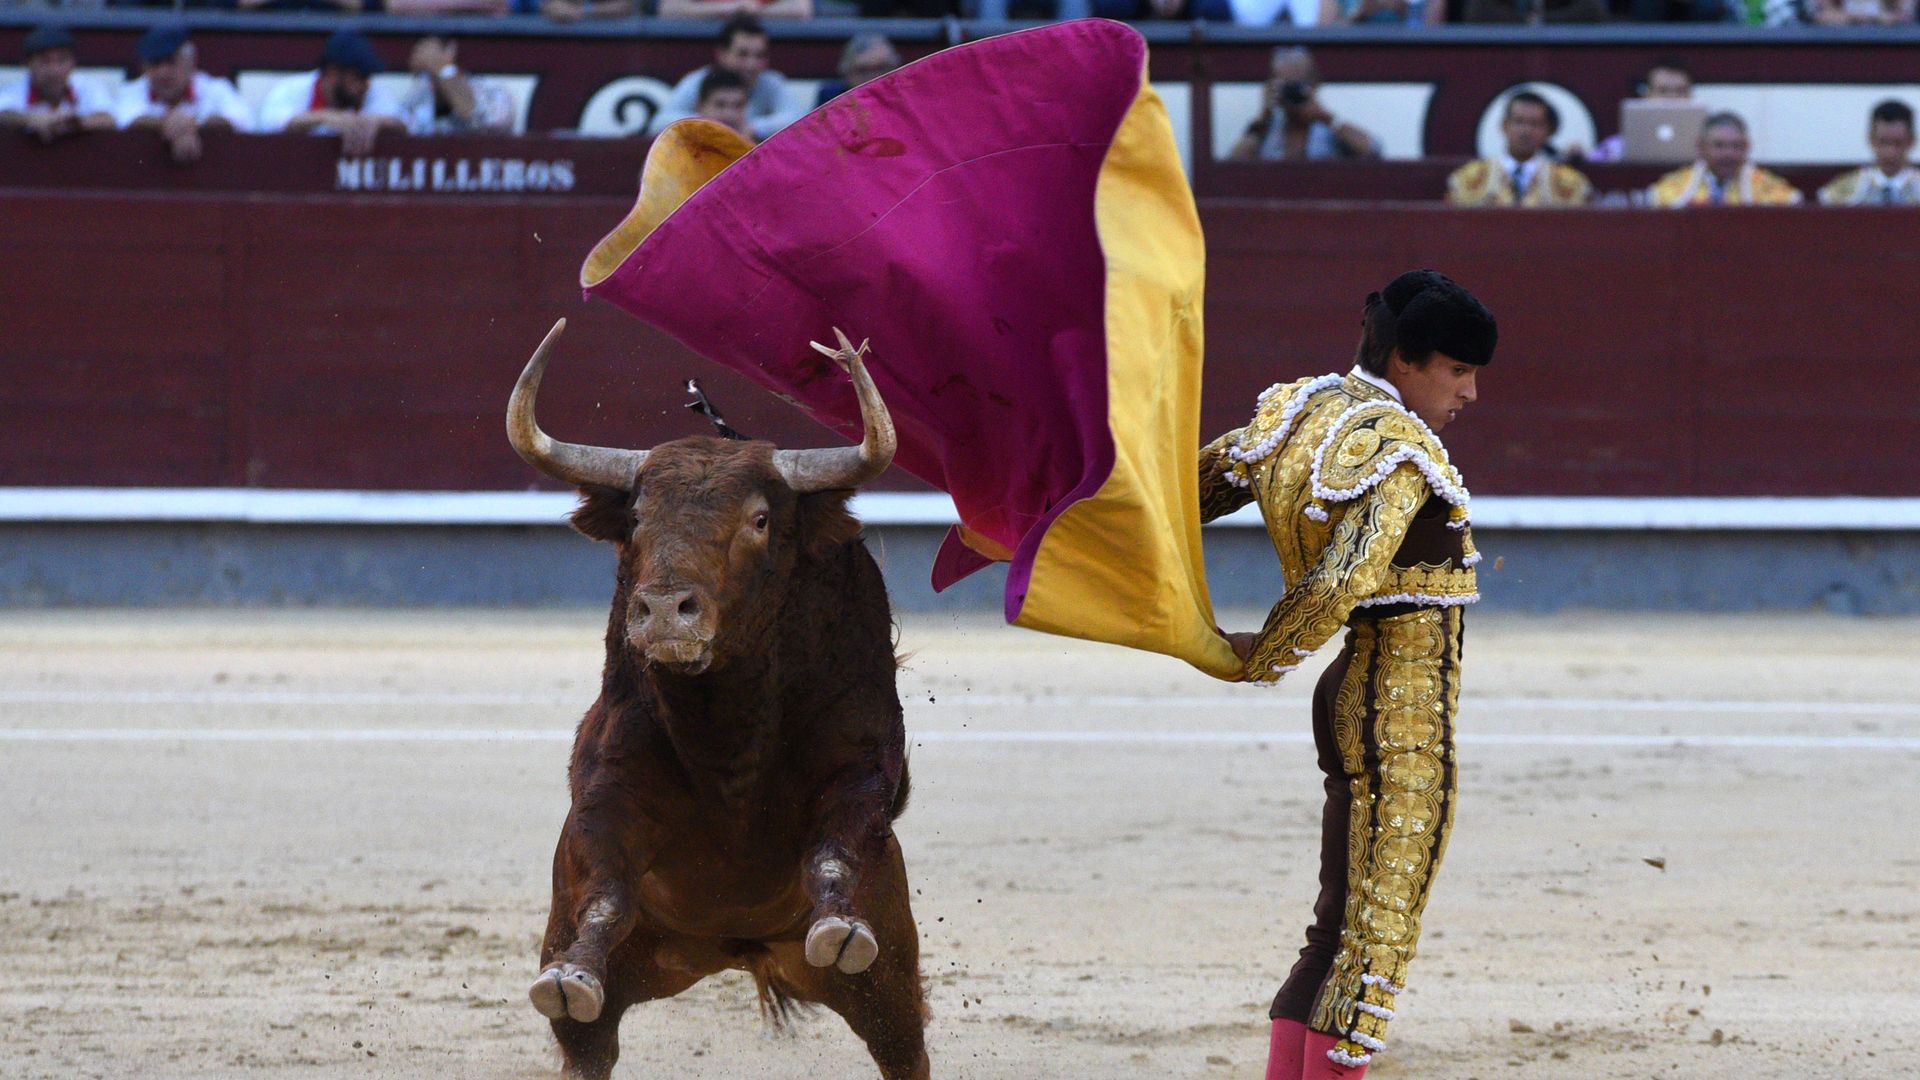 In this image, a bullfighter stands facing away from a bull while waving his sash behind him.